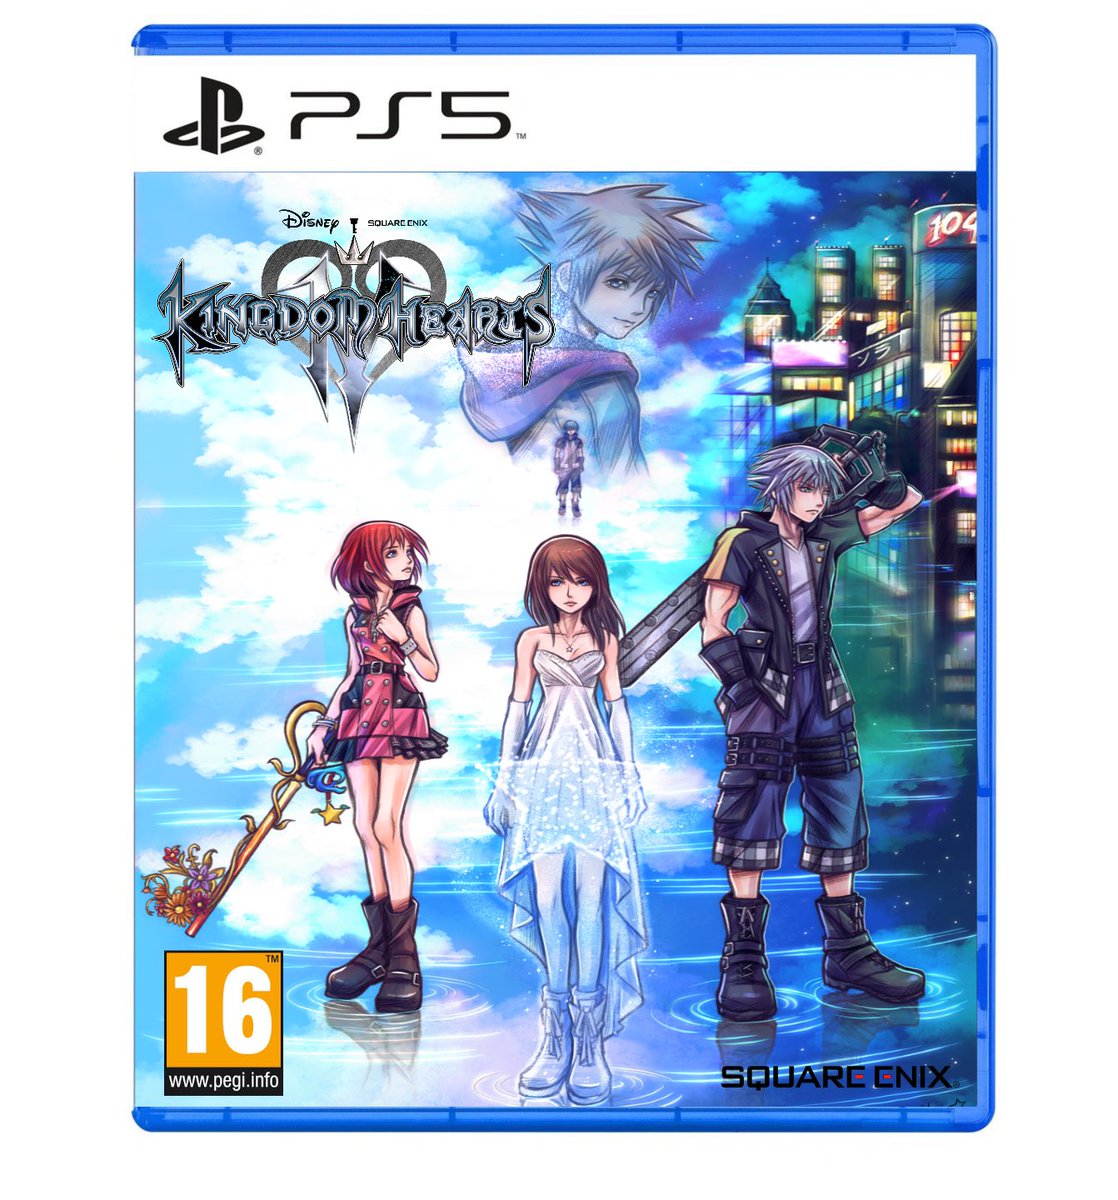 Kingdom Hearts IV official boxart revealed
Coming winter 2022 for PS5 🎮
#kingdomhearts #kh4 

ⓘ  𝗢𝗳𝗳𝗶𝗰𝗶𝗮𝗹 𝘀𝗼𝘂𝗿𝗰𝗲𝘀 𝘀𝘁𝗮𝘁𝗲𝗱 𝘁𝗵𝗮𝘁 𝘁𝗵𝗶𝘀 𝗶𝘀 𝗳𝗮𝗹𝘀𝗲 𝗮𝗻𝗱 𝗺𝗶𝘀𝗹𝗲𝗮𝗱𝗶𝗻𝗴